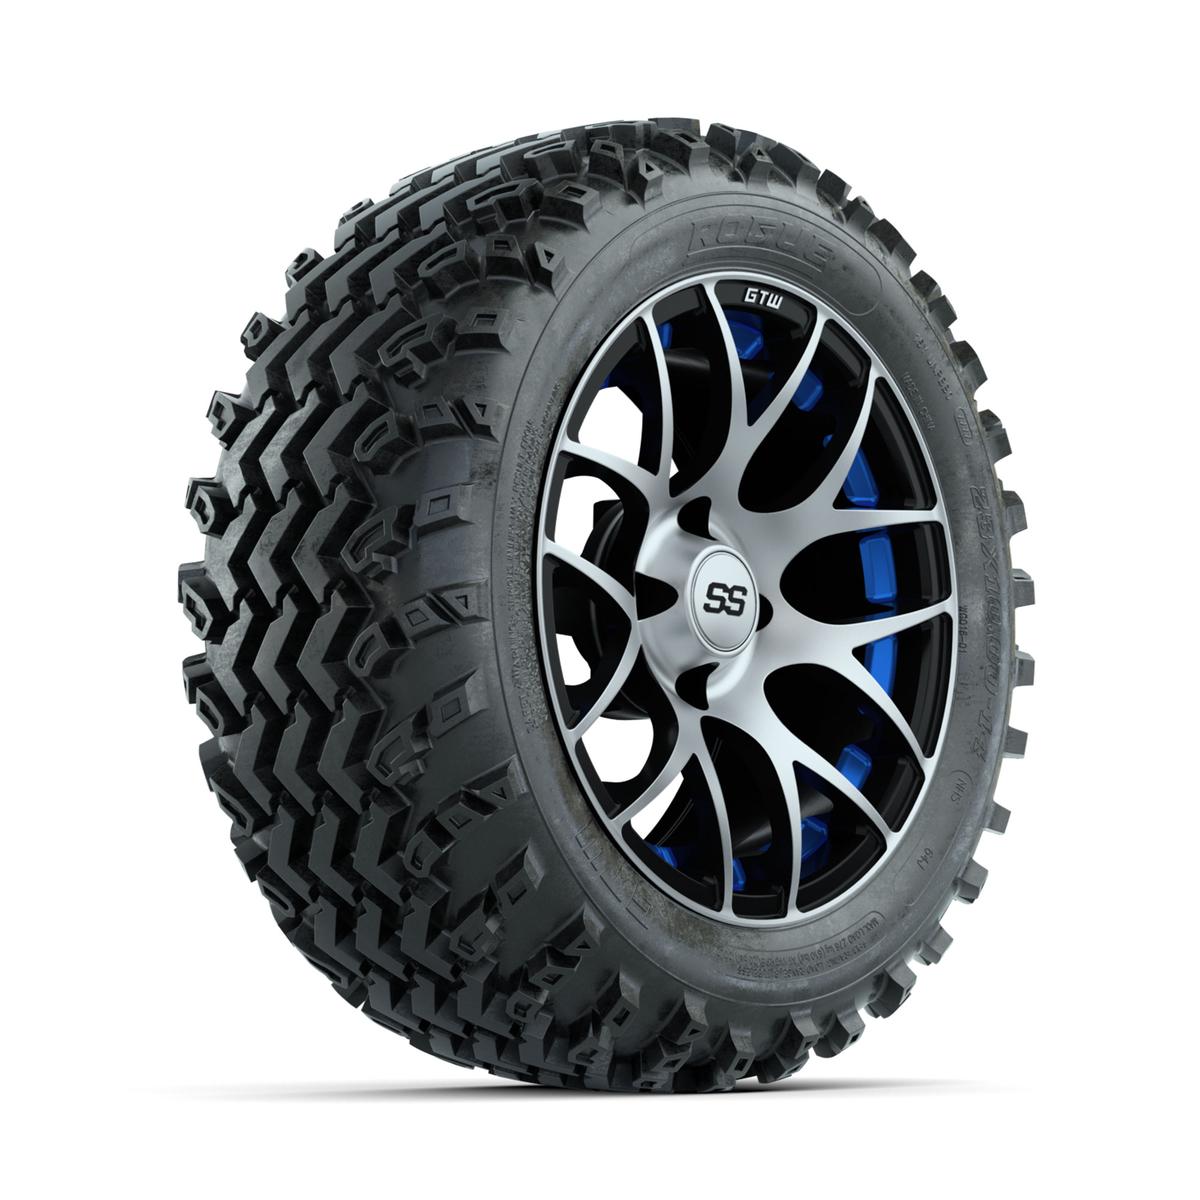 GTW Pursuit Blue 14 in Wheels with 23x10.00-14 Rogue All Terrain Tires – Full Set